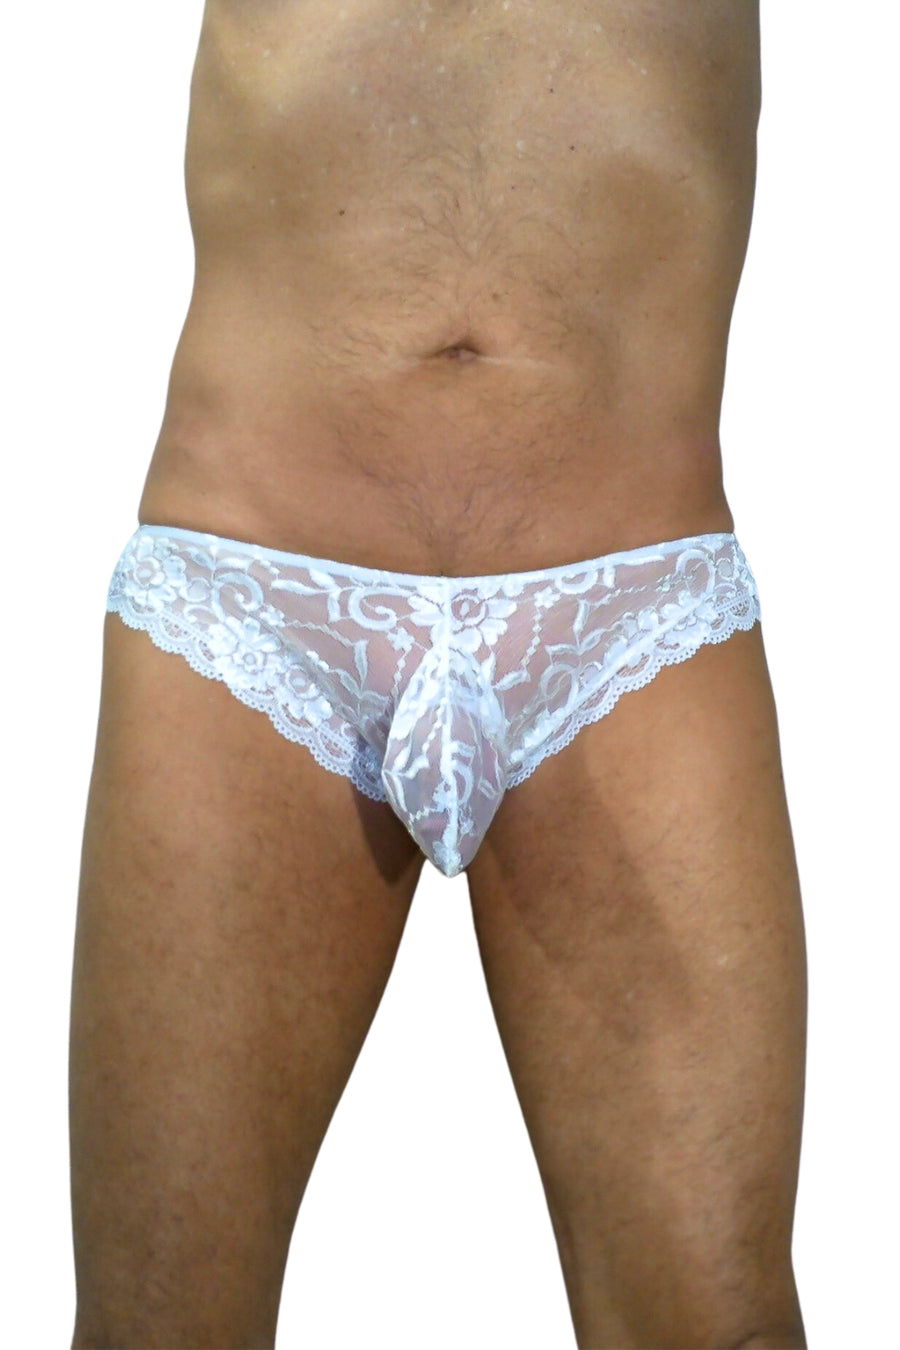 Full front view of White Lace Brief. Model is 6'2" 190 pounds, 8 inches cut full shaved around genitals